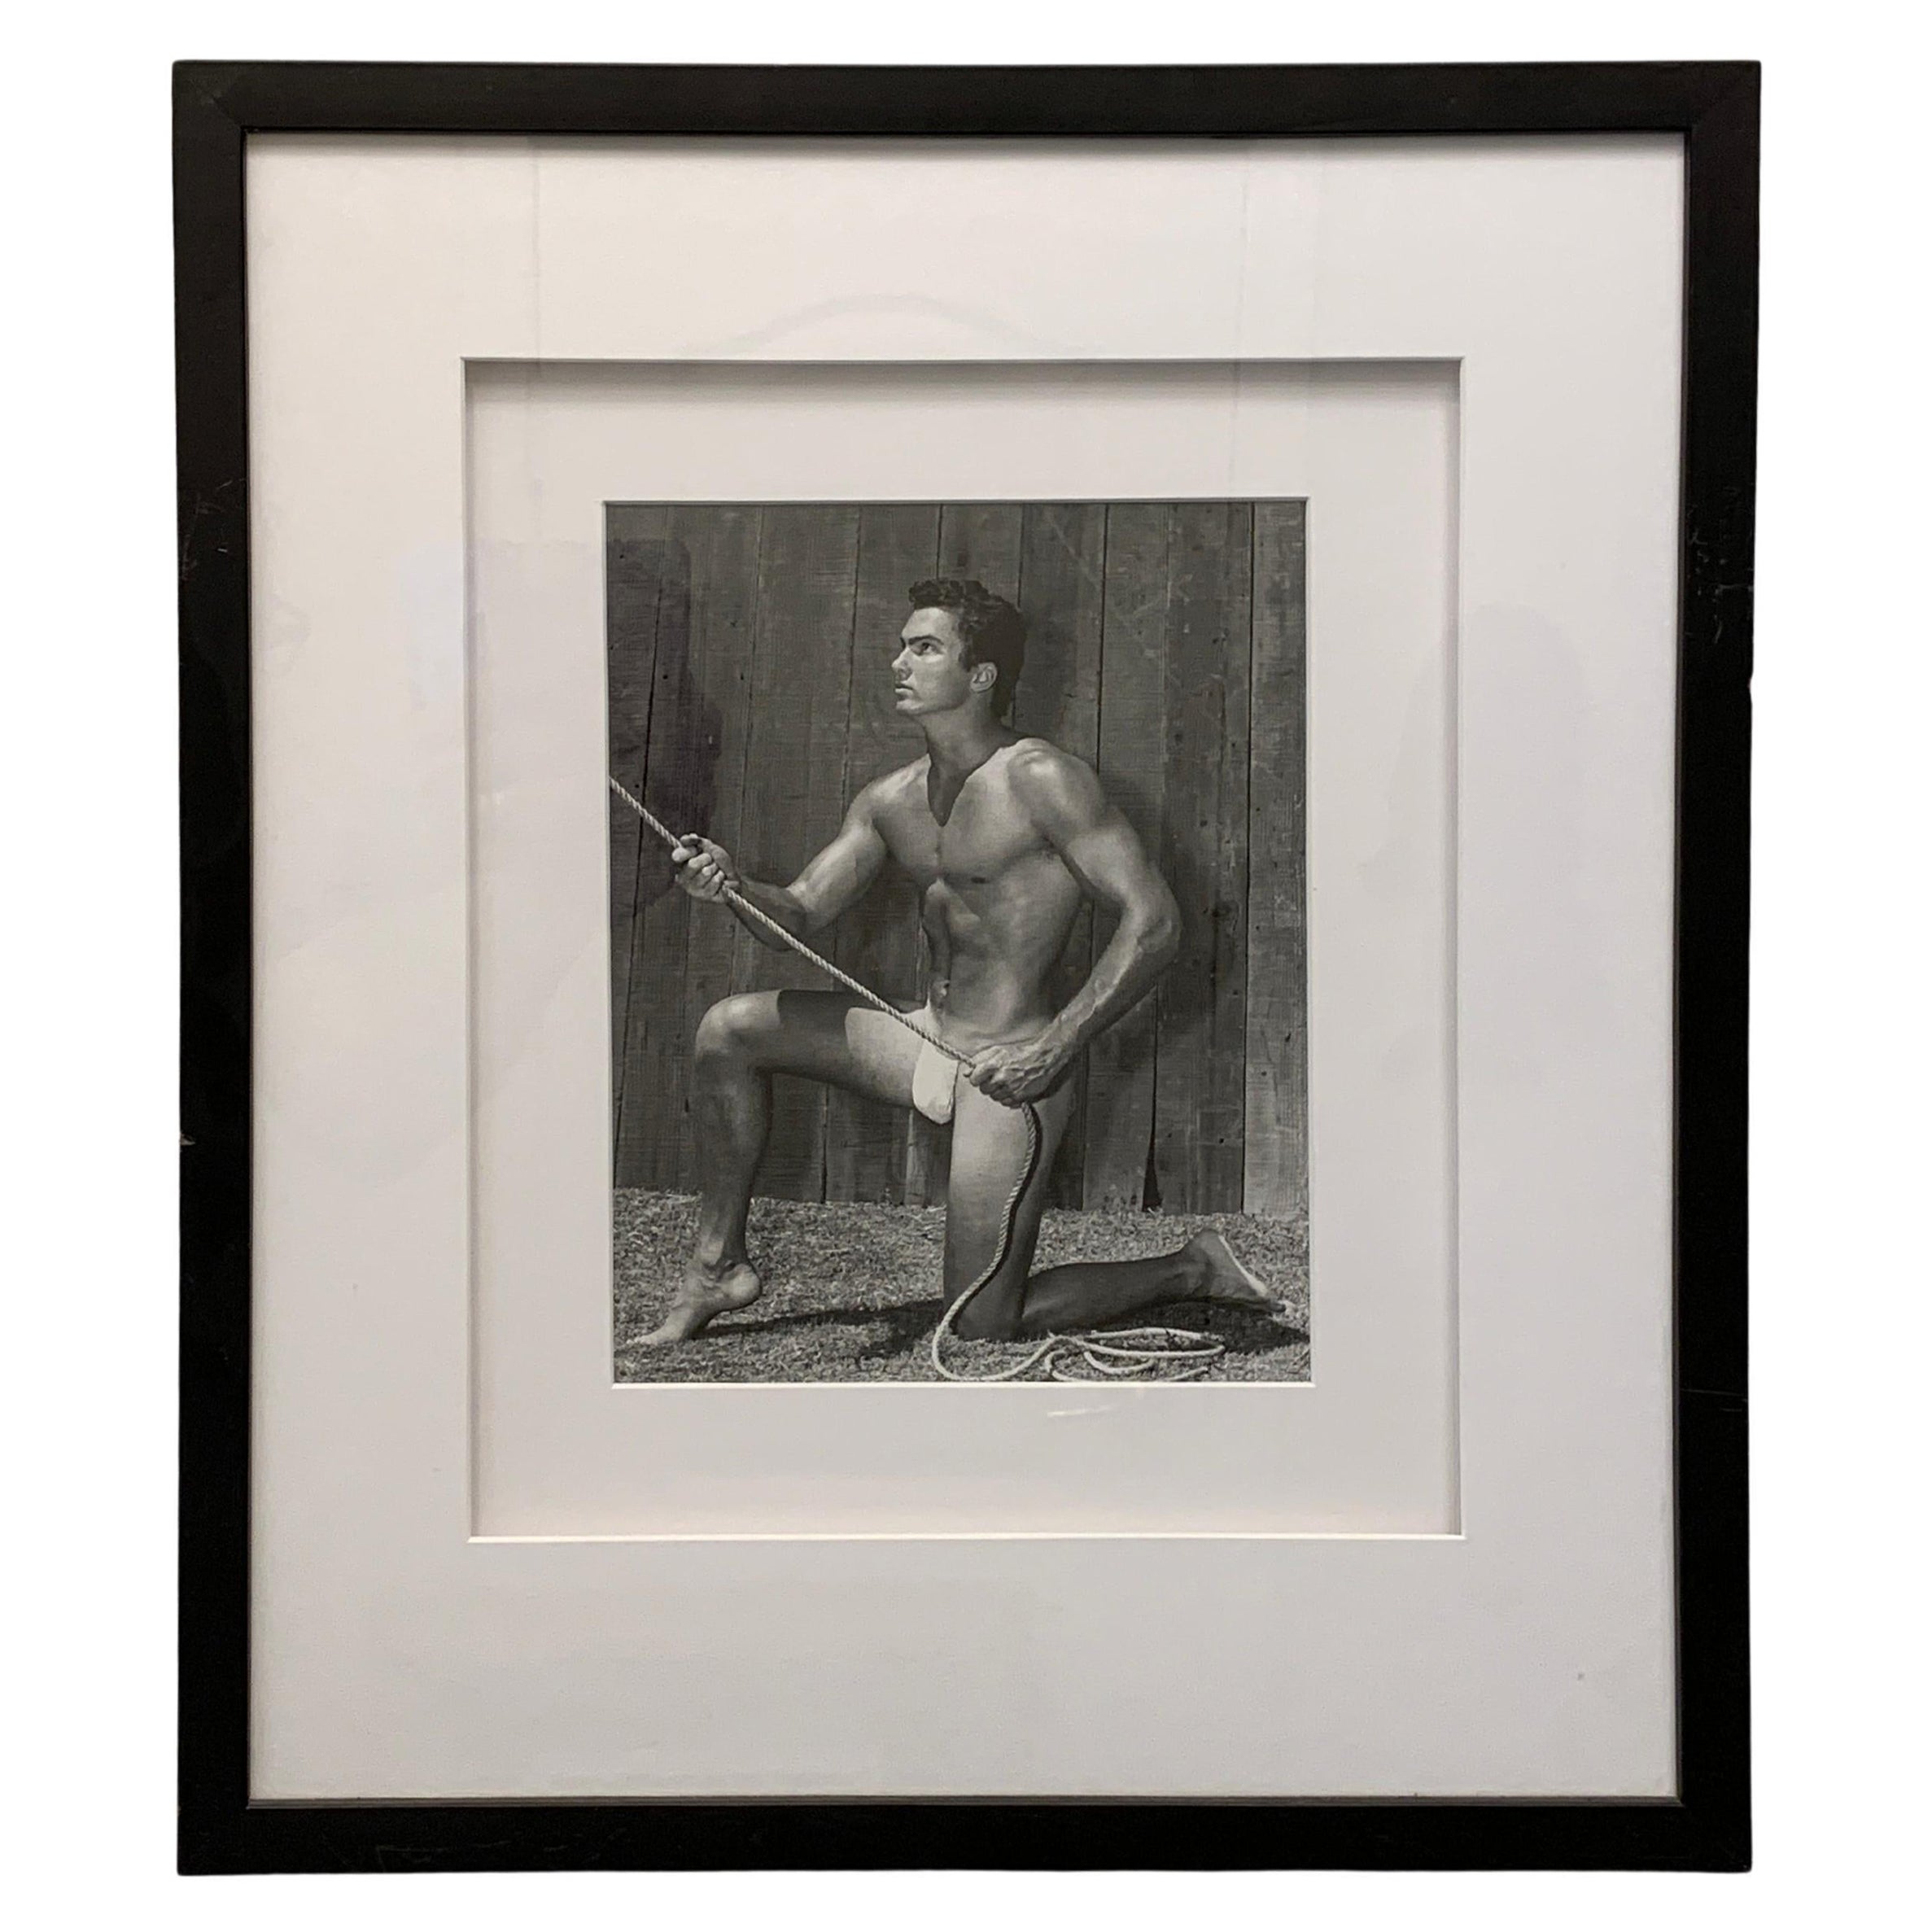 Bruce of L.A.Original 1950s Male Physique Photograph Model Handsome Bill Gregory For Sale